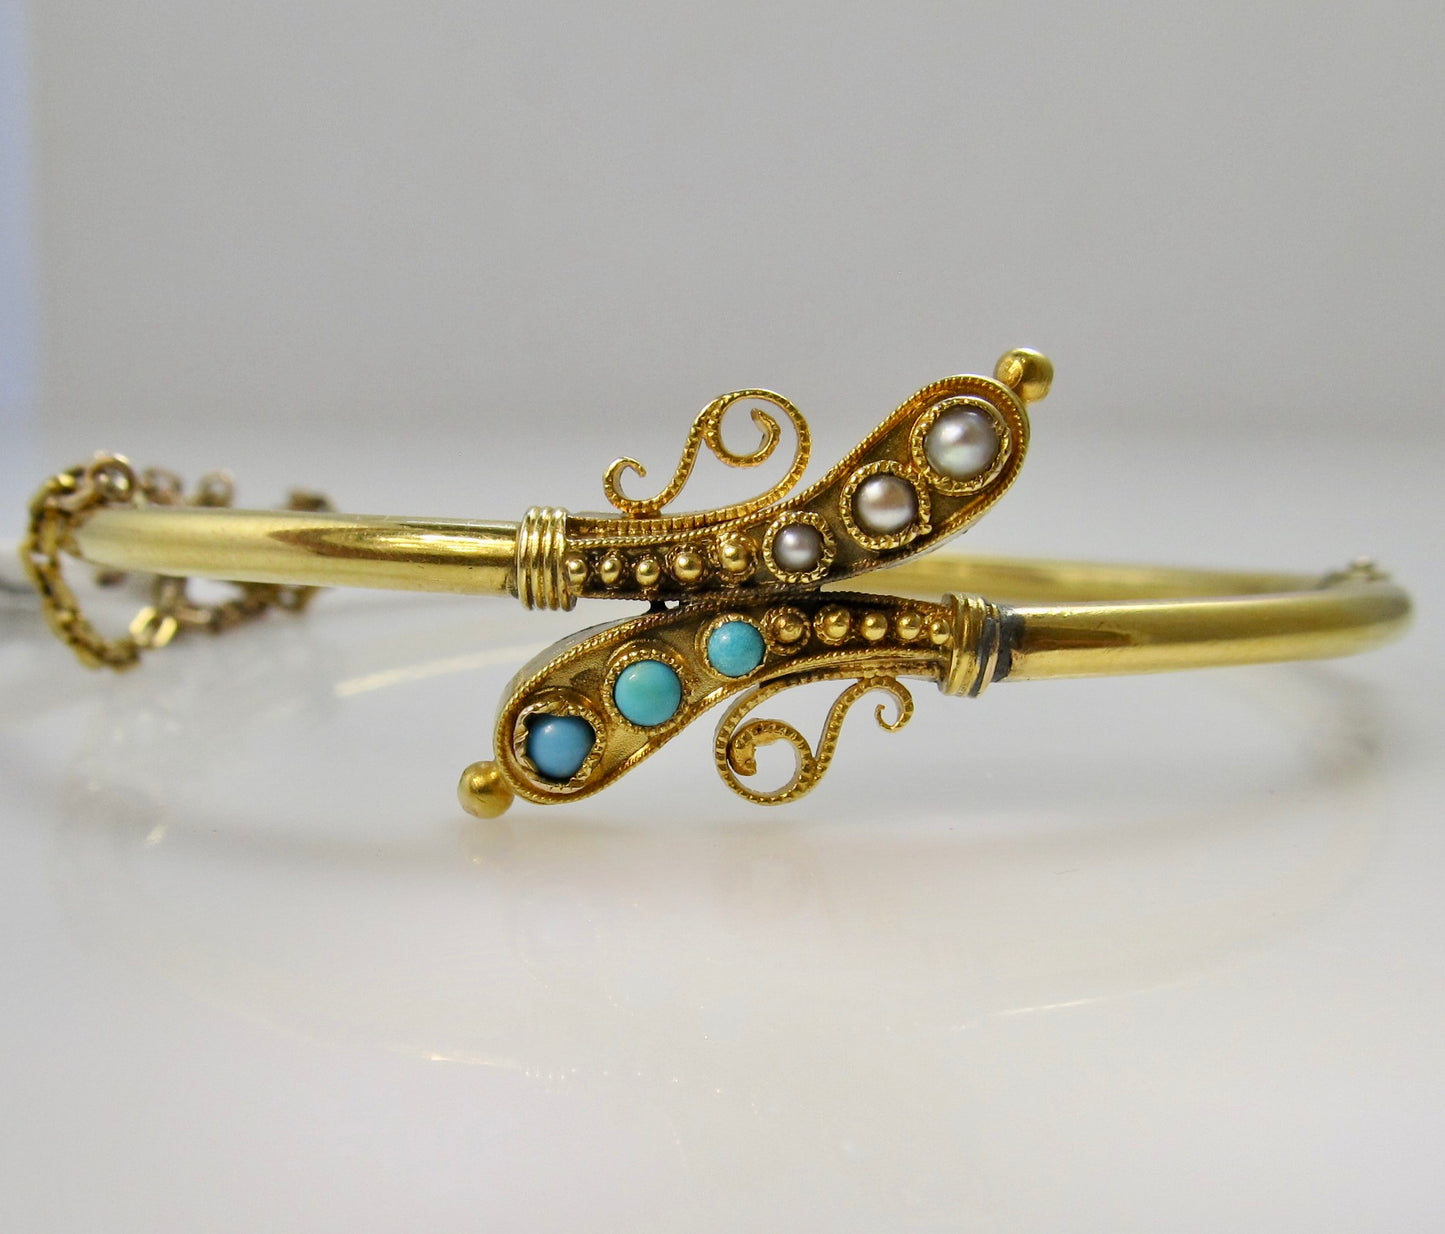 Antique turquoise and pearl bangle bracelet